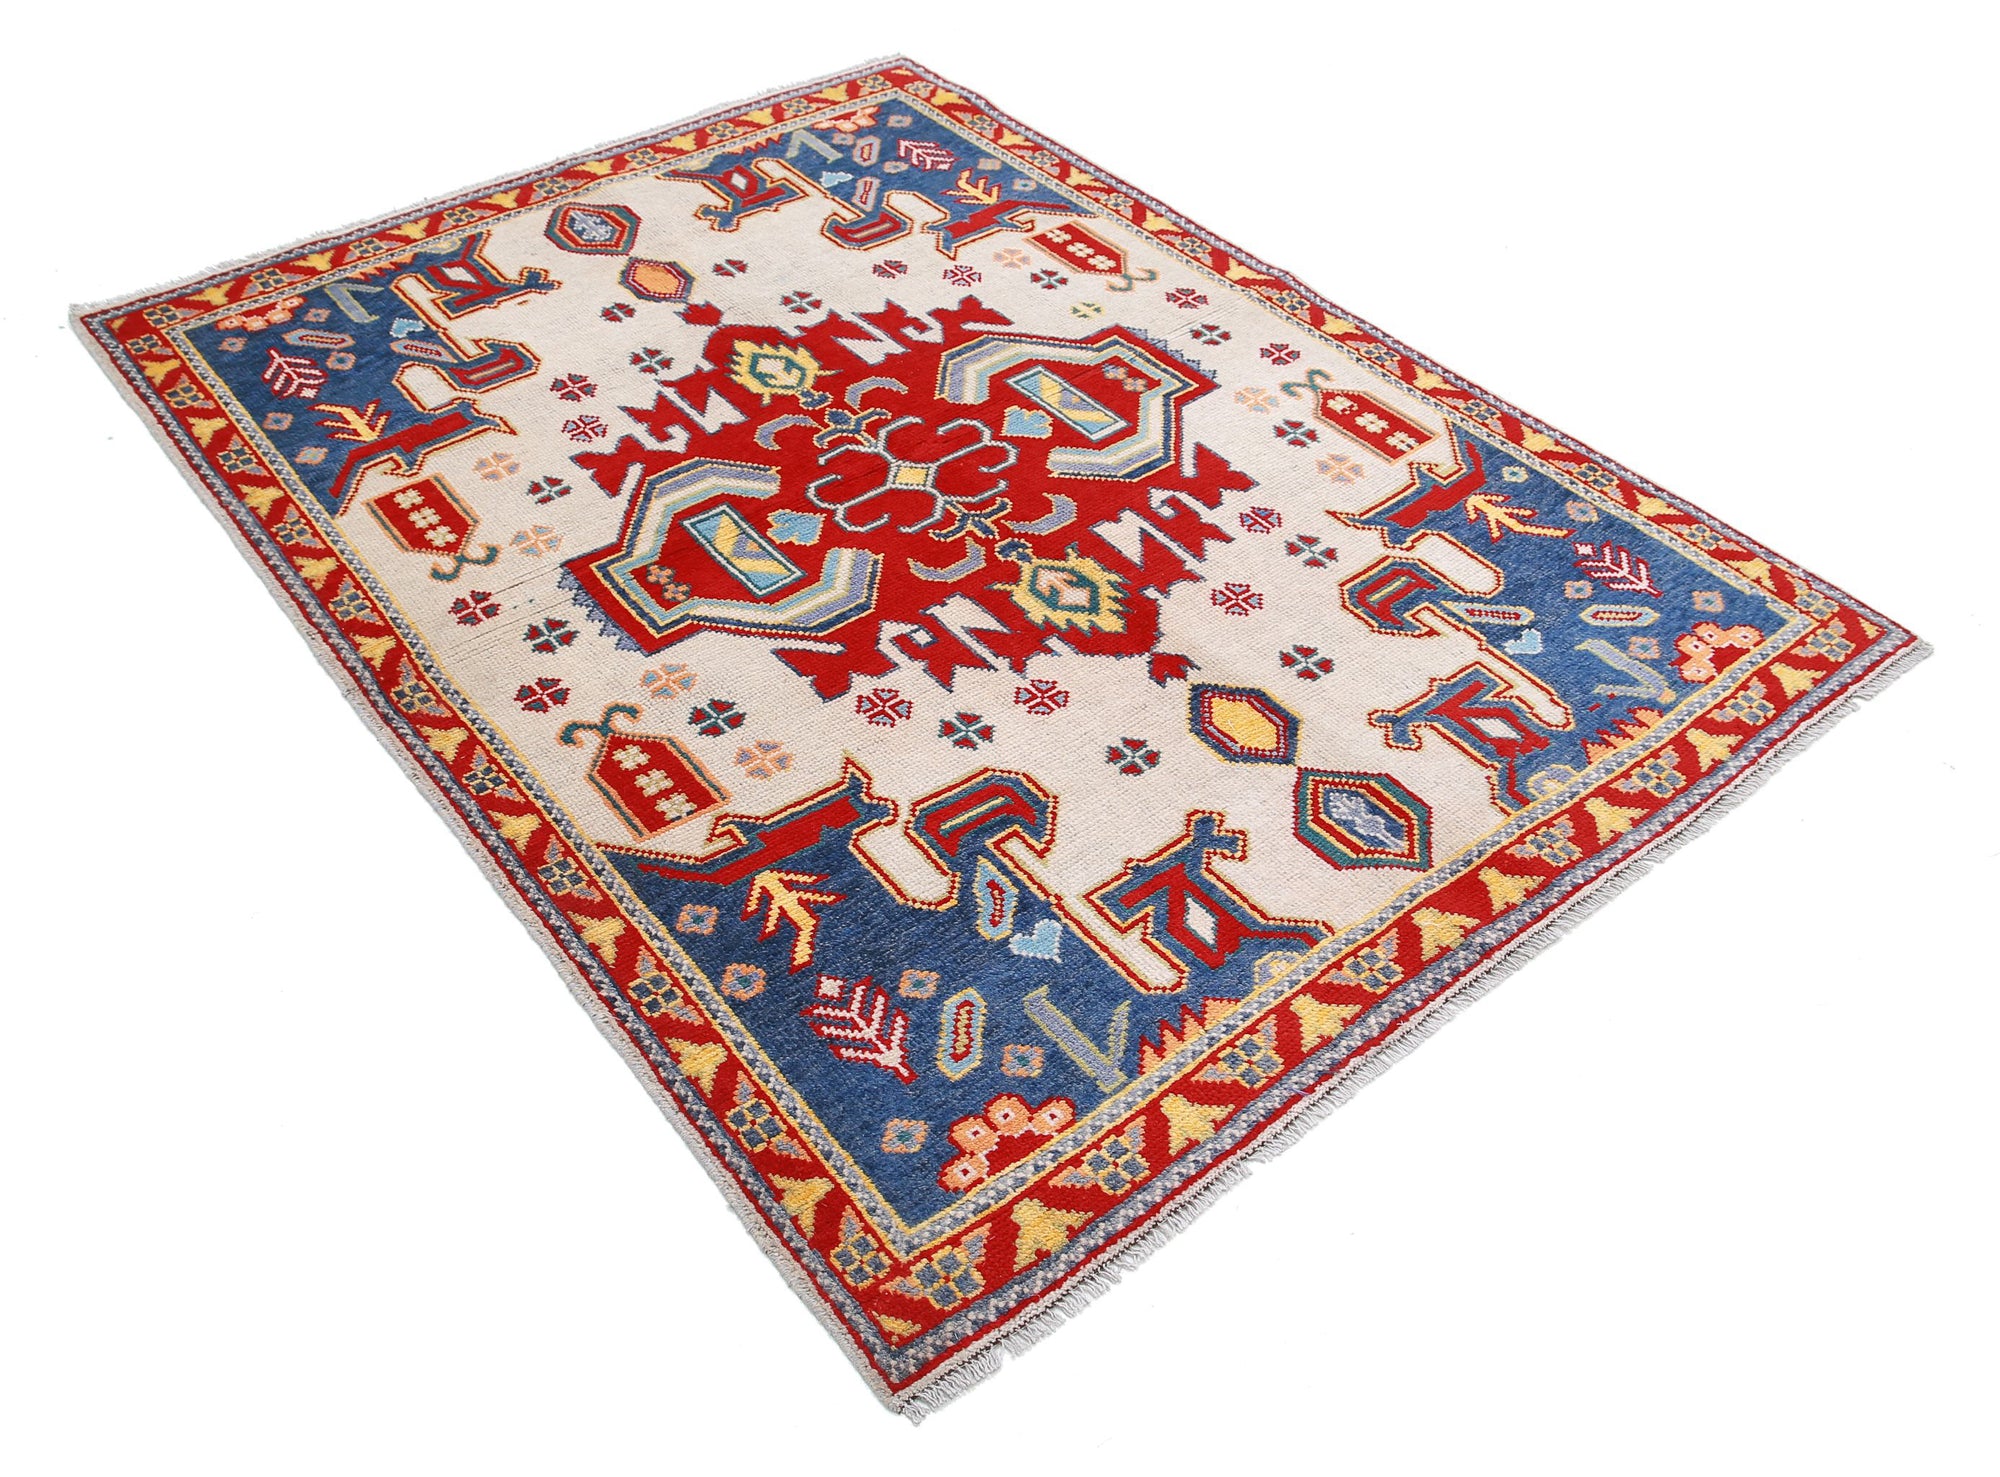 Revival-hand-knotted-qarghani-wool-rug-5014218-1.jpg